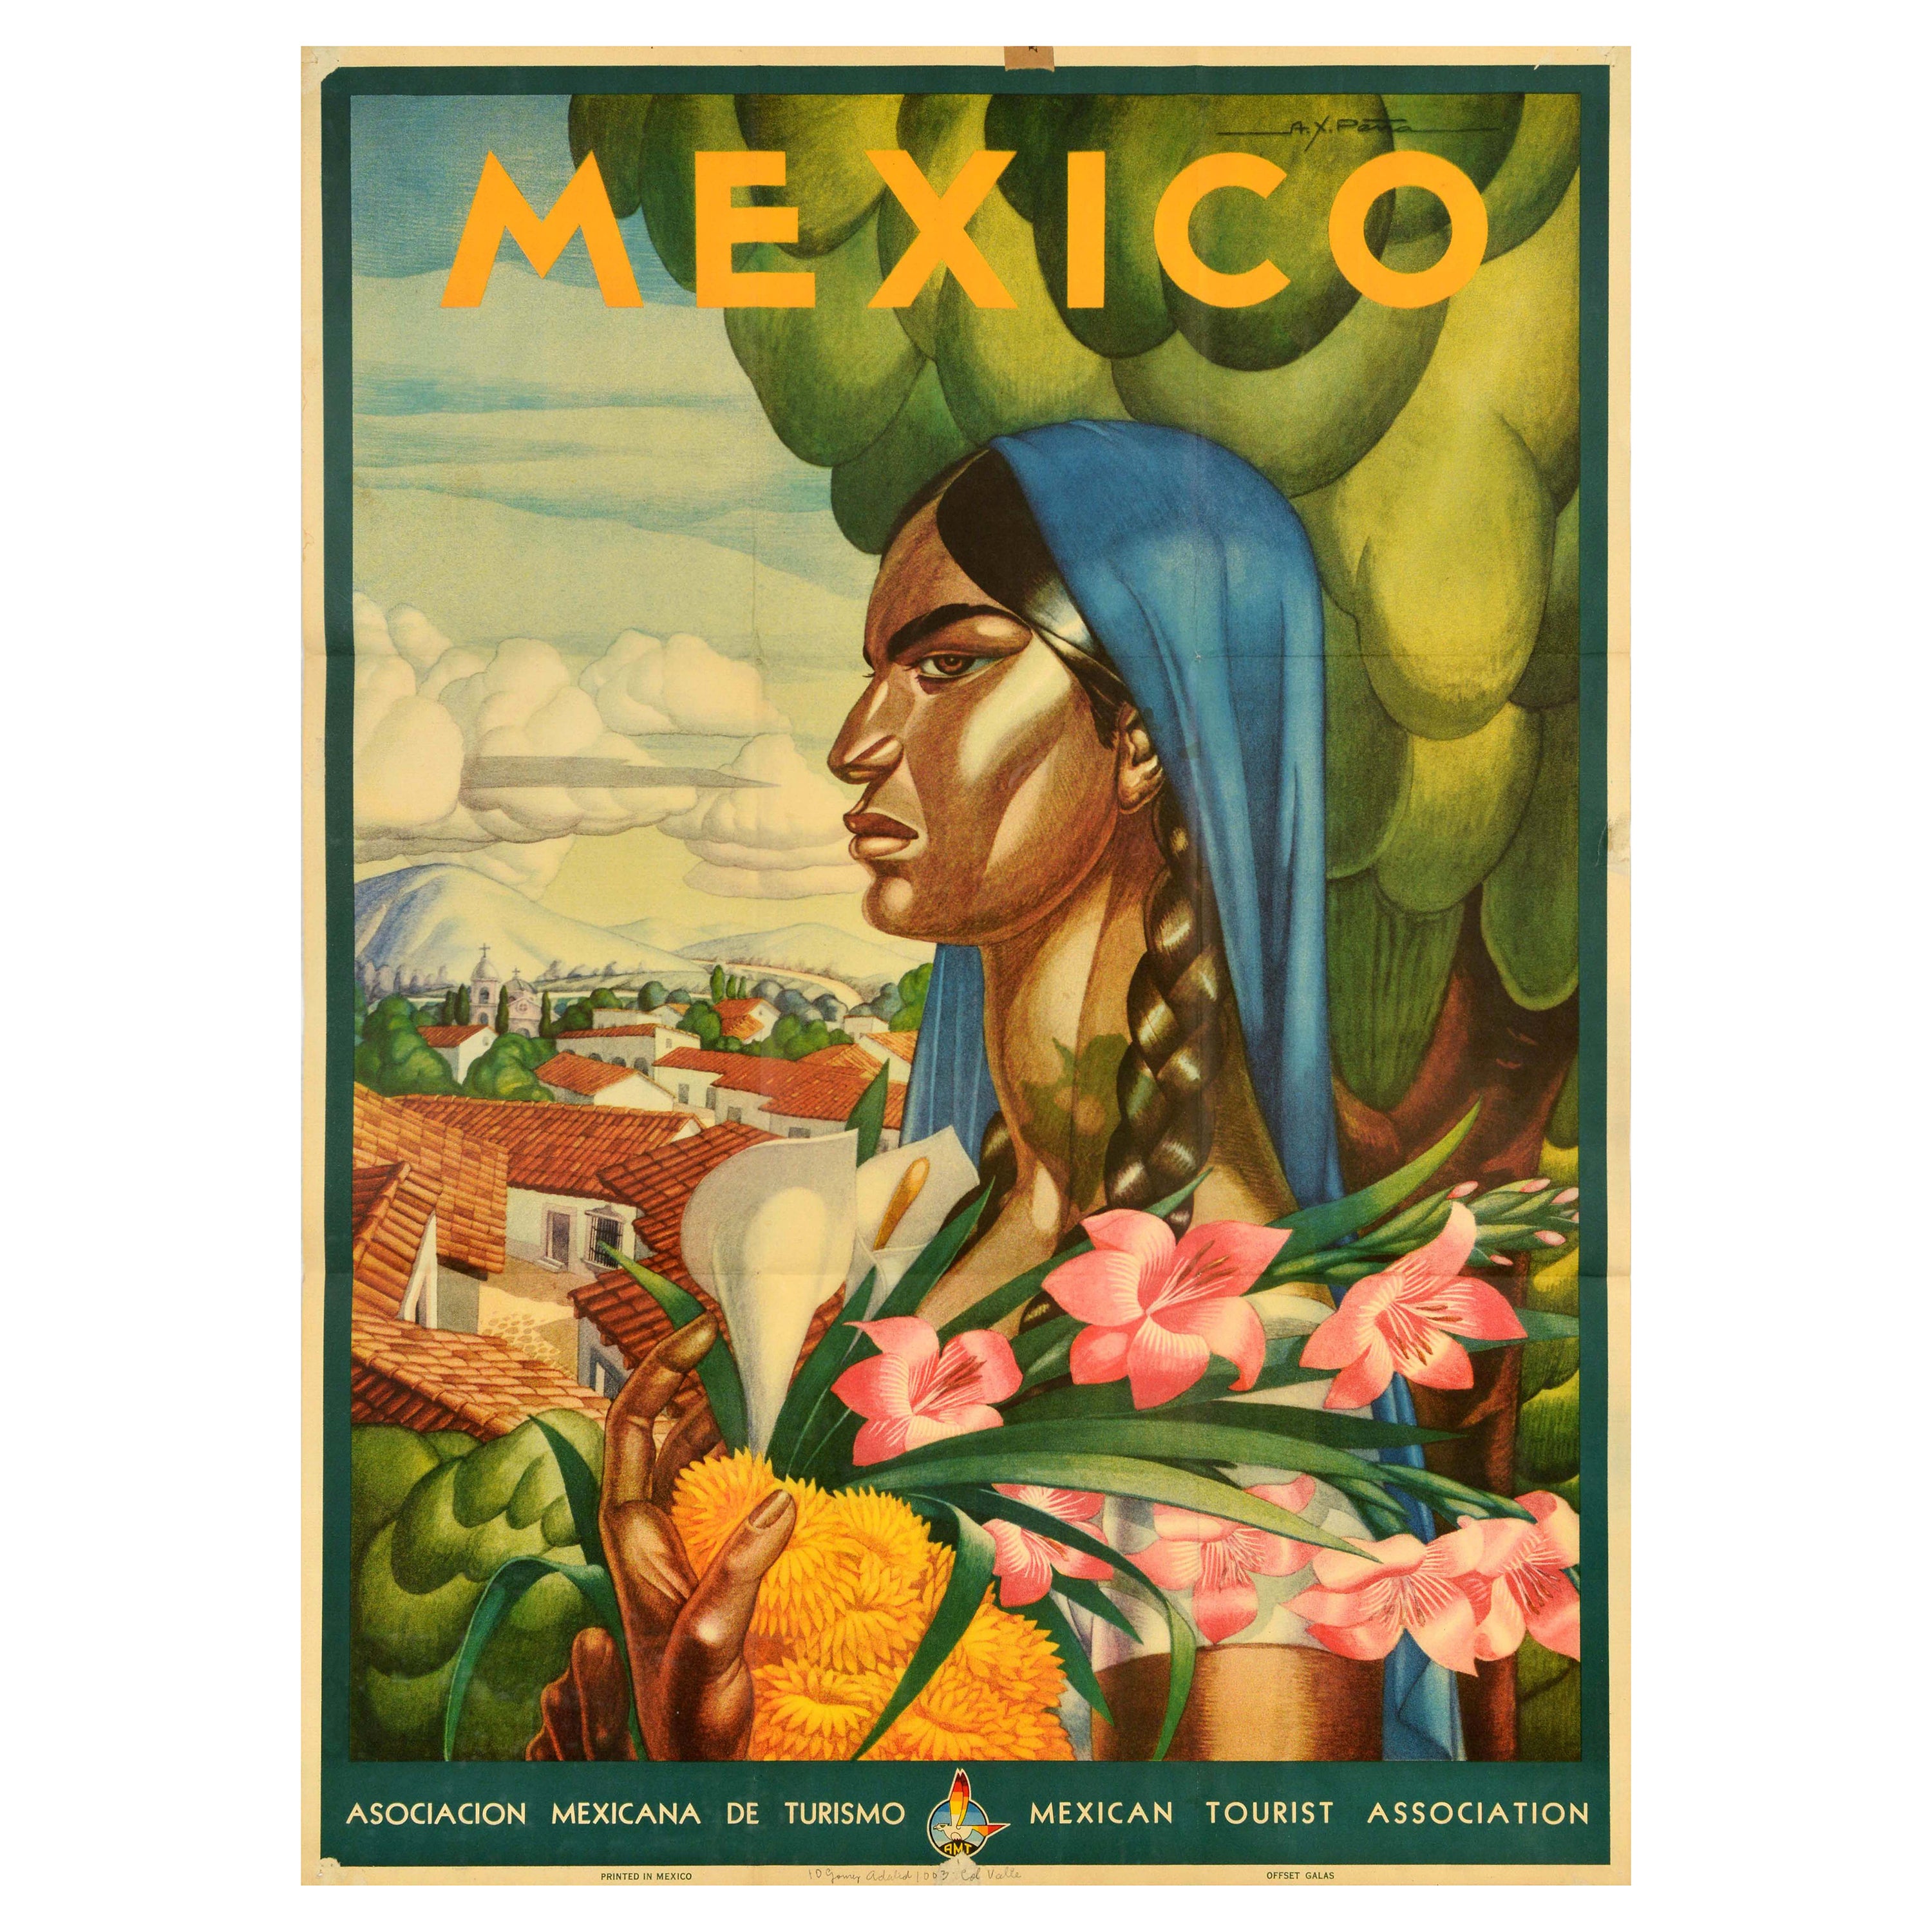 Original Vintage Travel Poster Mexico Alfonso X Pena Midcentury Art For Sale